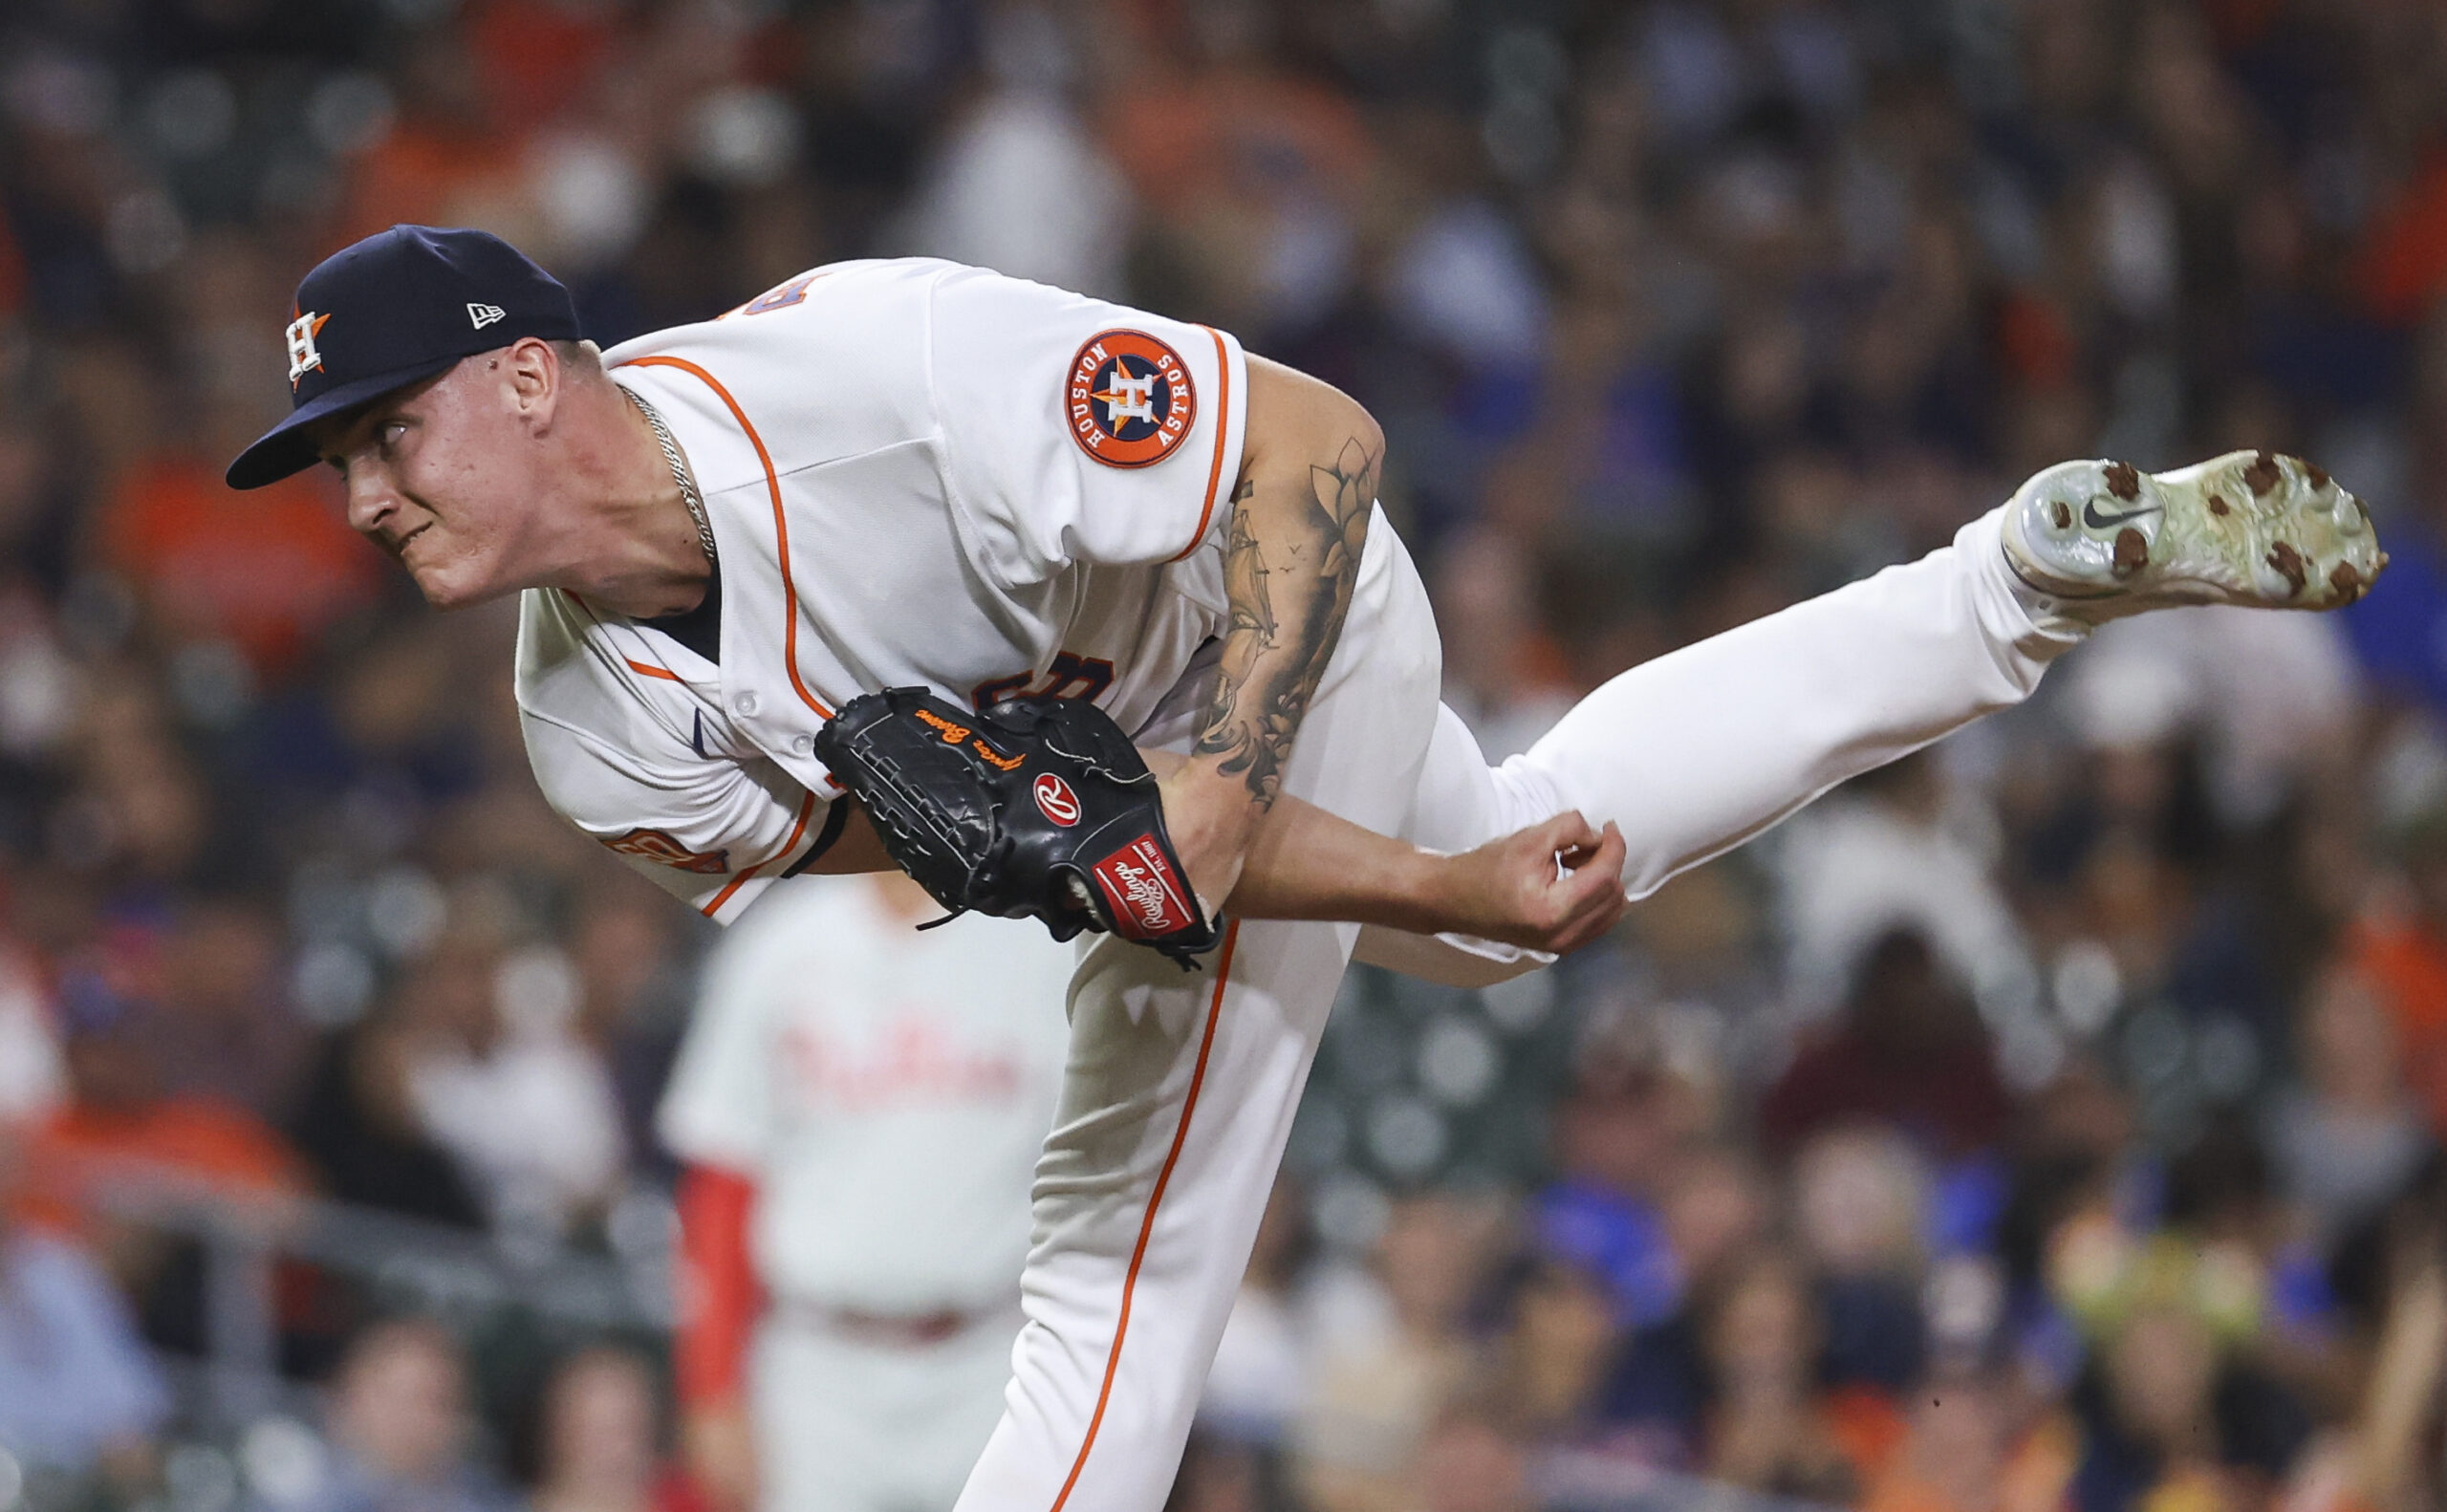 Hunter Brown strikes out career-best 10, Astros send A's to worst